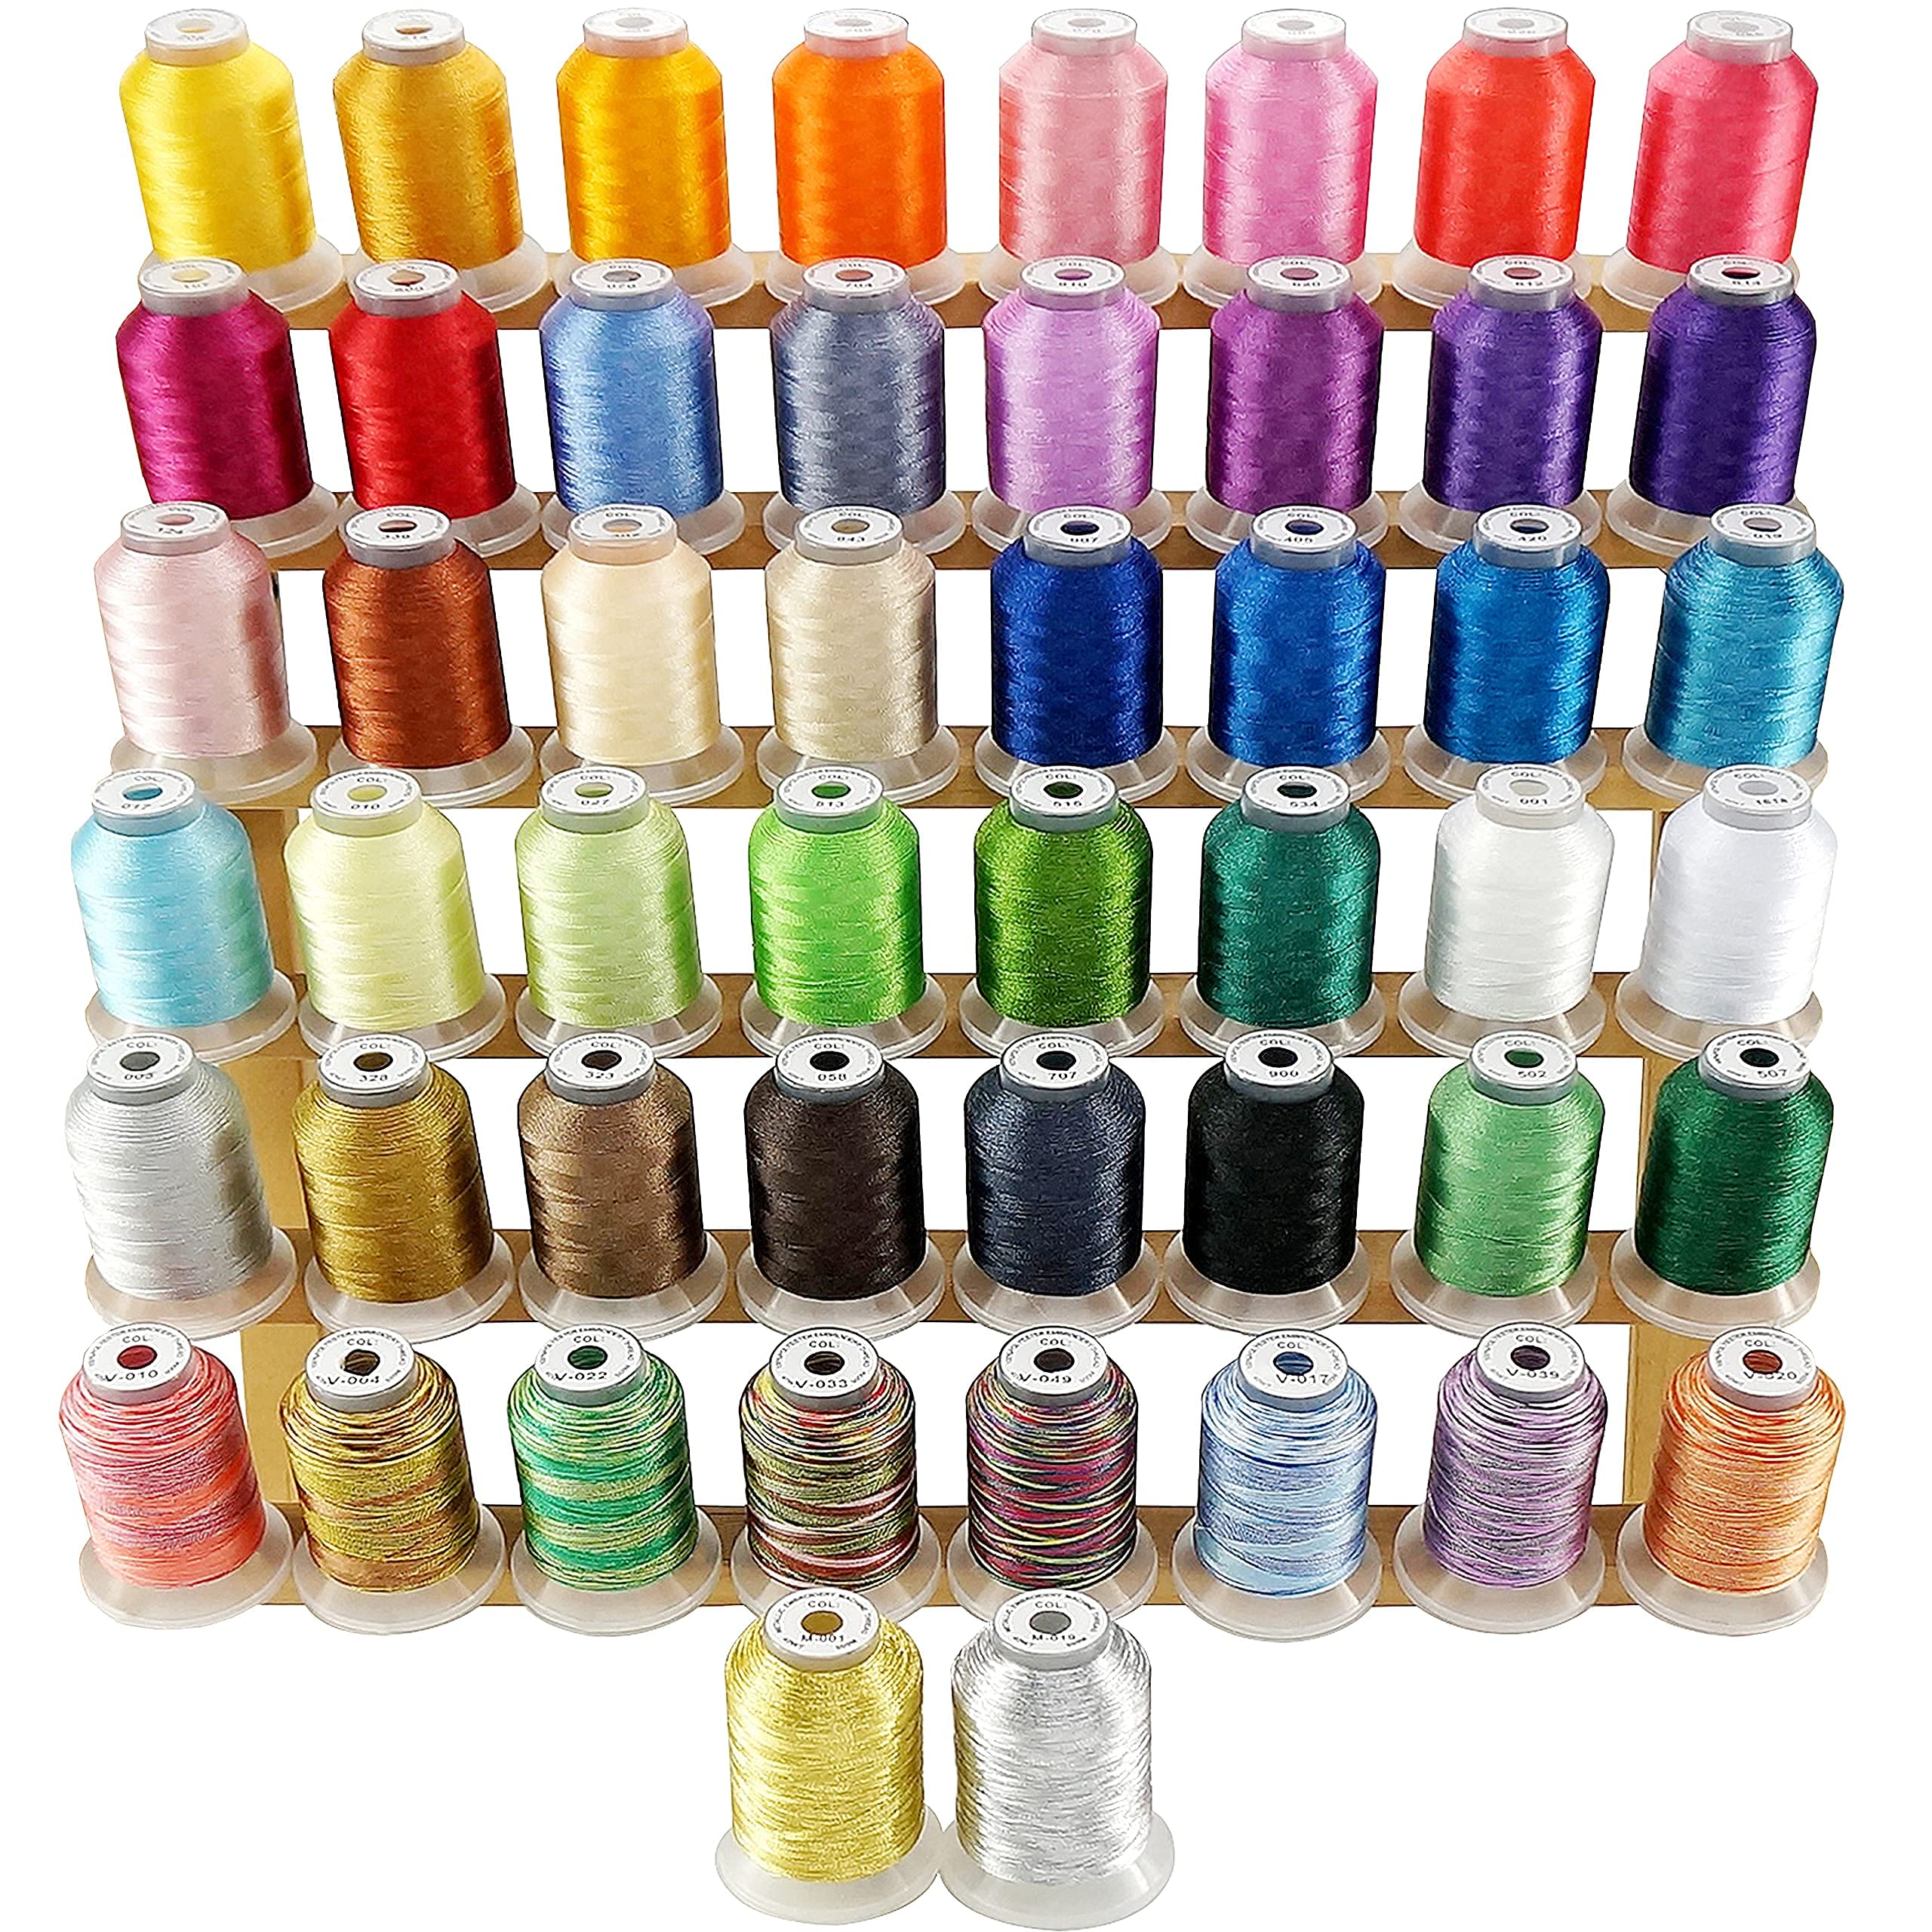 New brothread 50 Spools Embroidery Machine Thread Kit Including 40 Brother  Colors+8 Variegated Colors+2 Metallic Colors for Brother Janome Singer  Pfaff Husqvarna Embroidery Sewing Machines